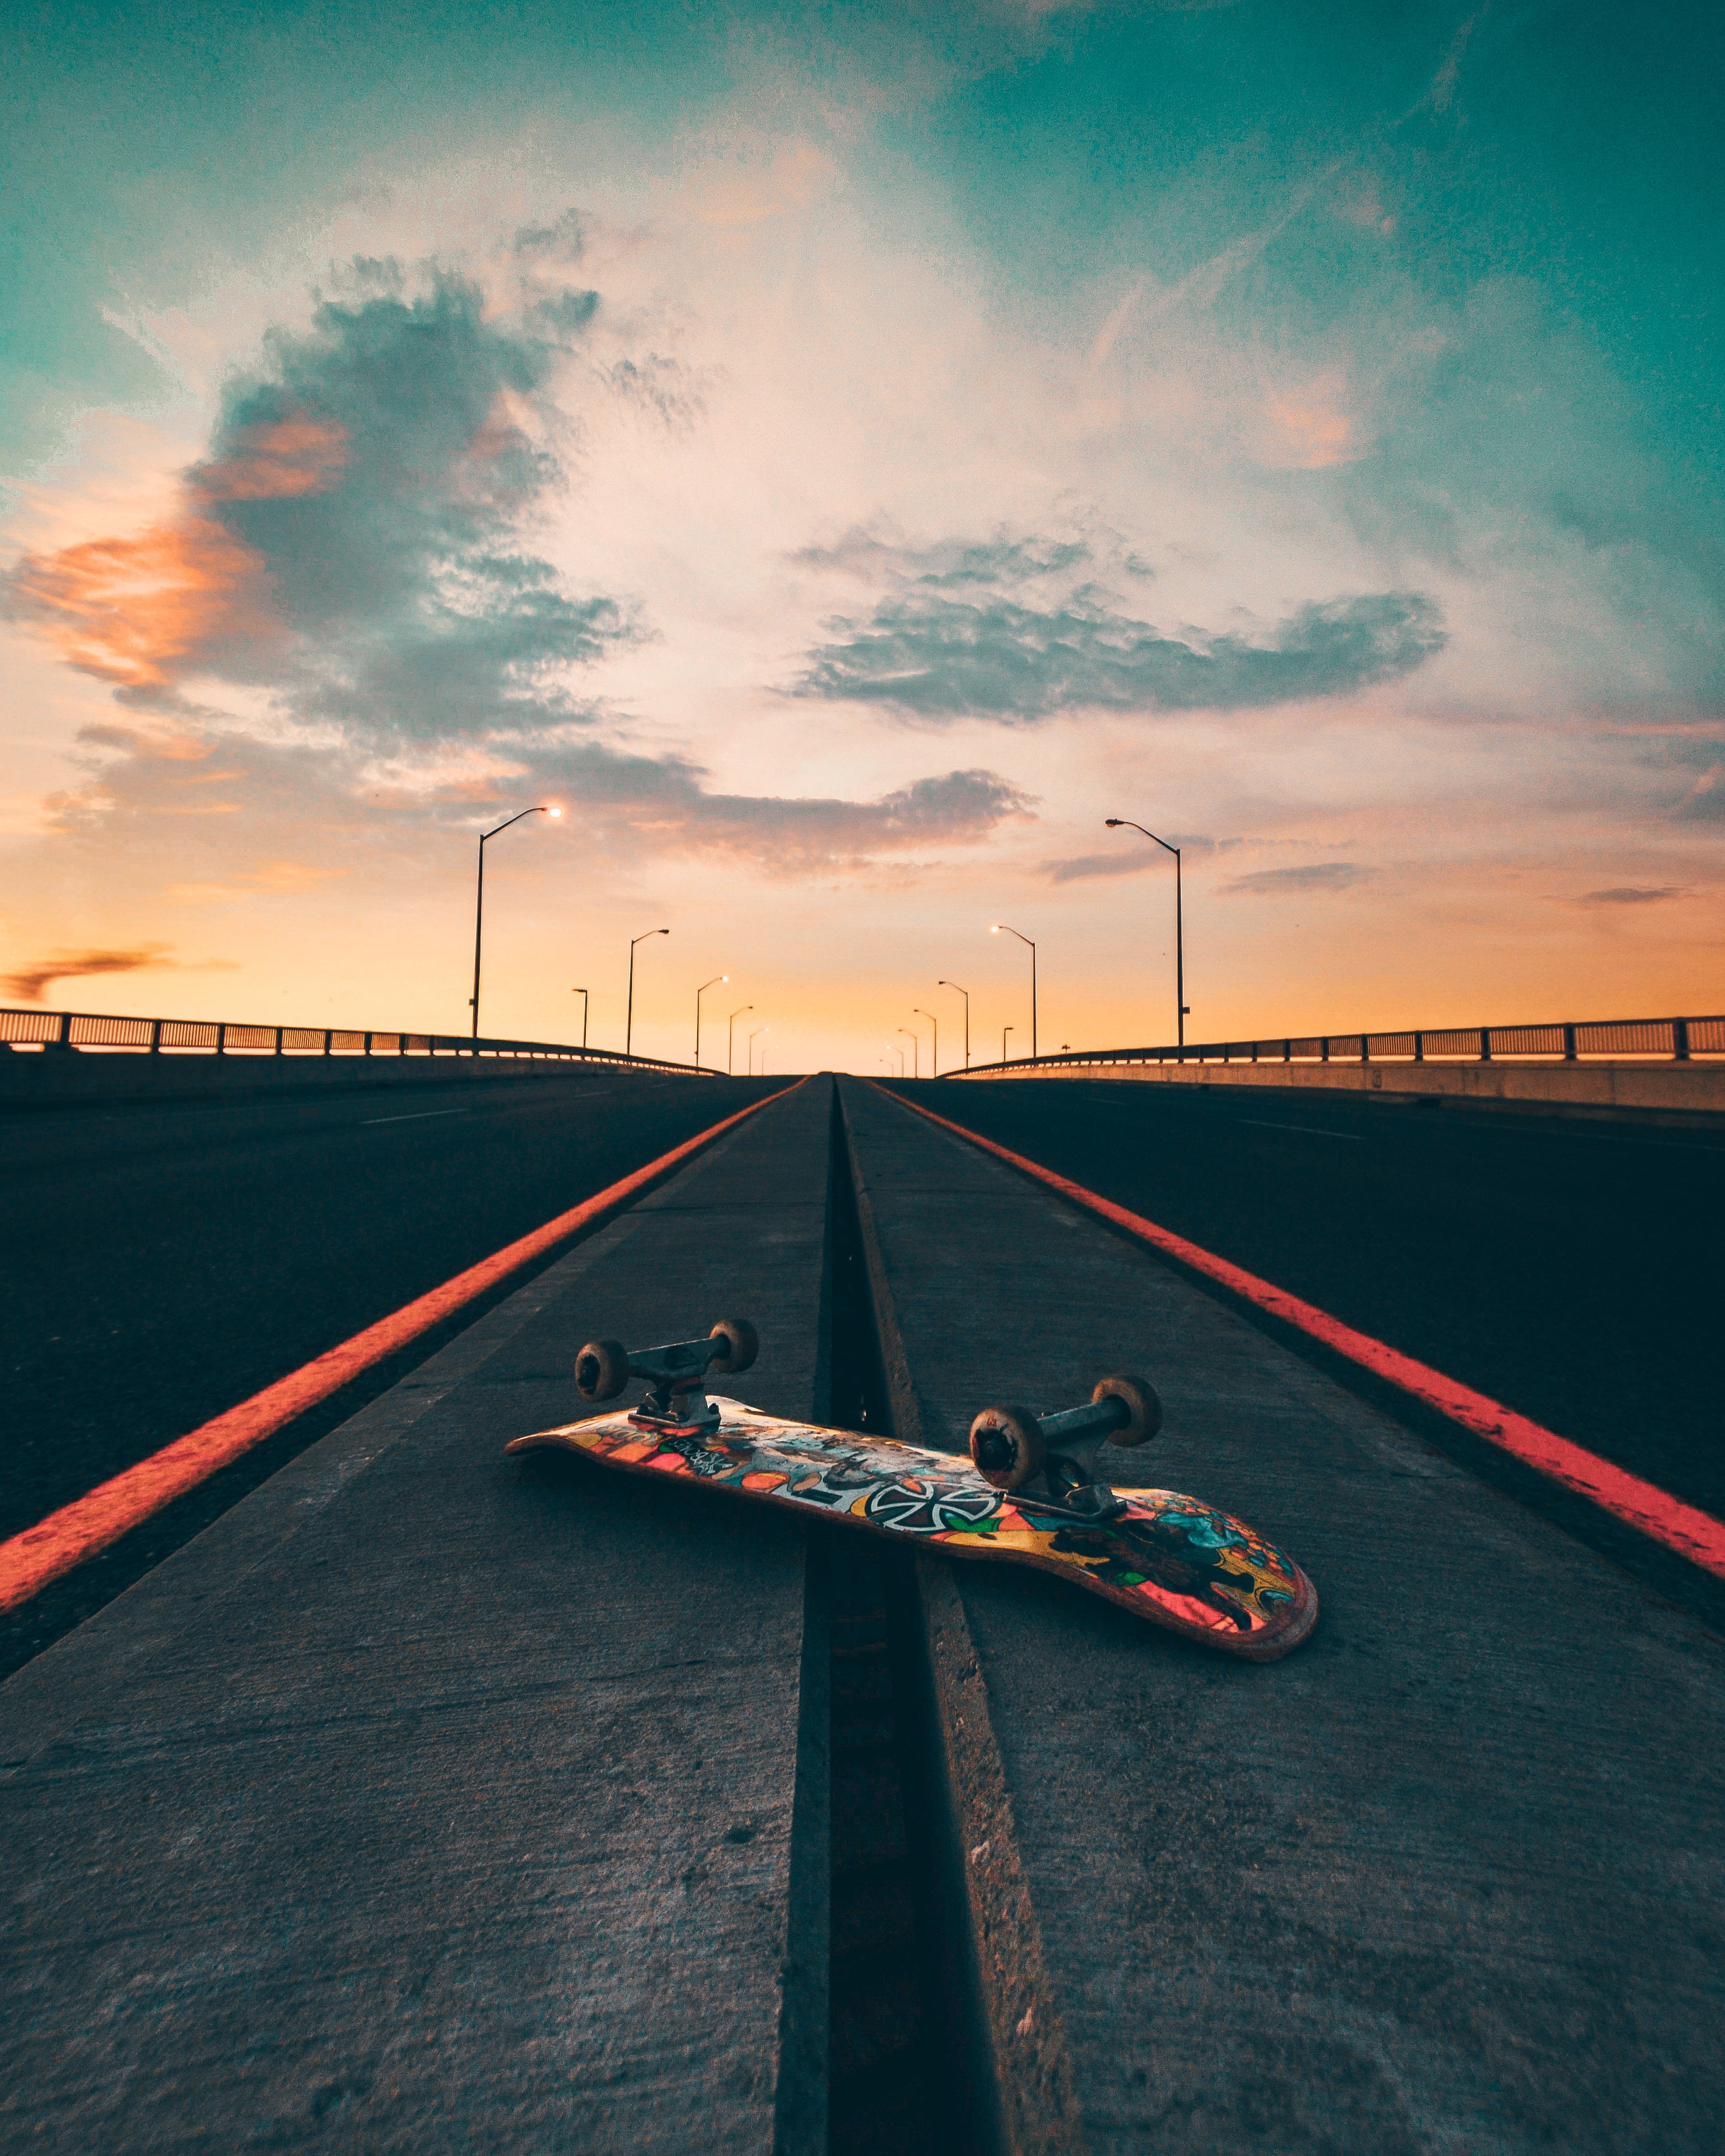 black and brown skateboard, road, marking, sky, outdoors, sport